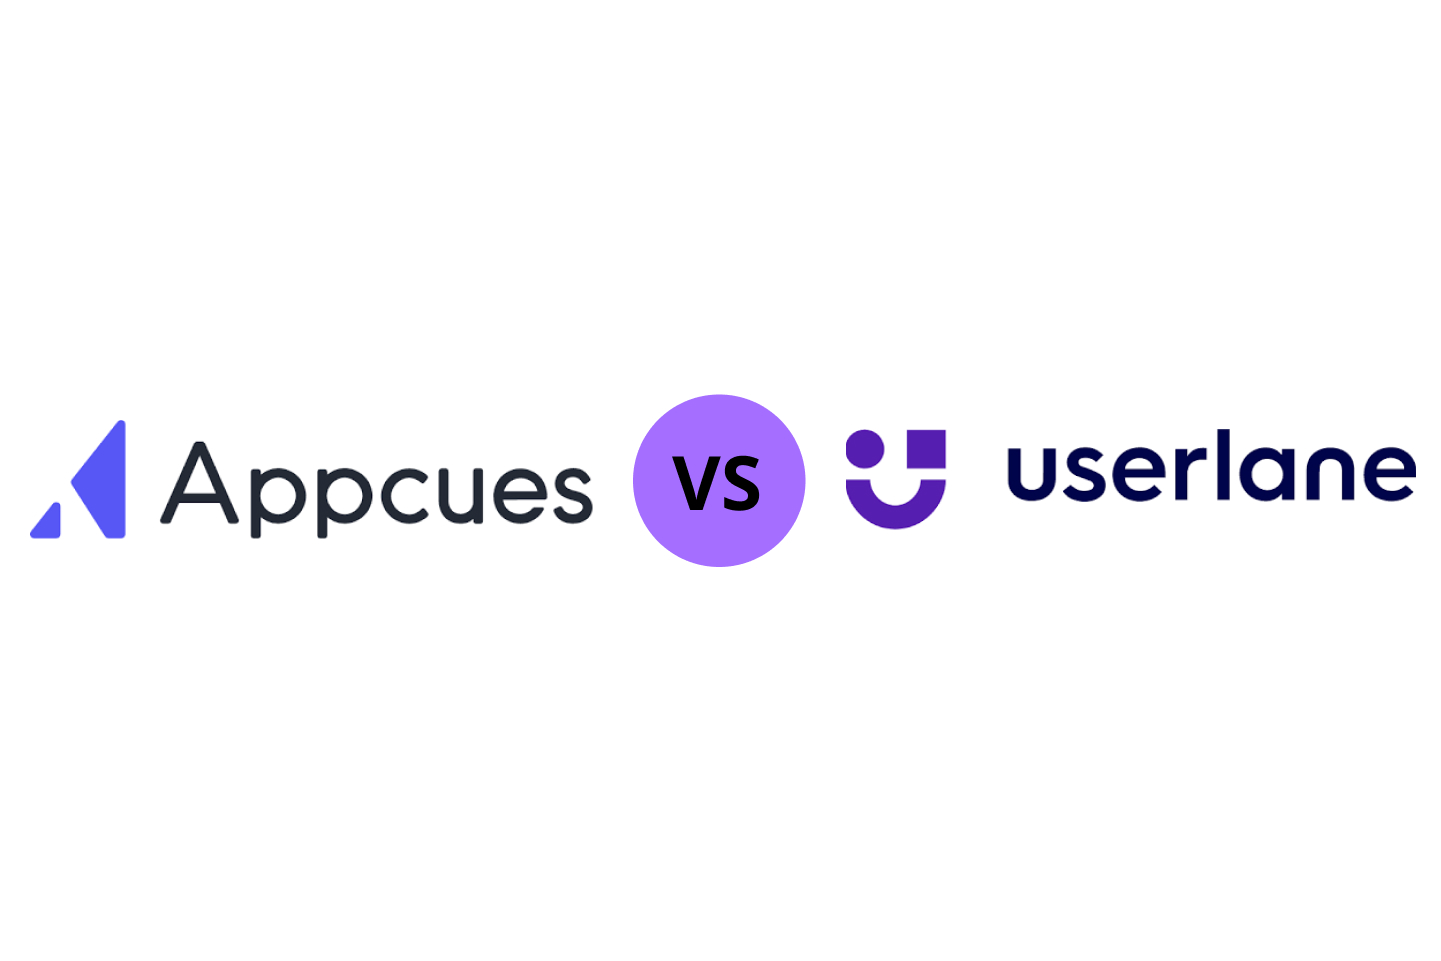 Appcues vs. Userlane: Which One You Should Choose in 2022